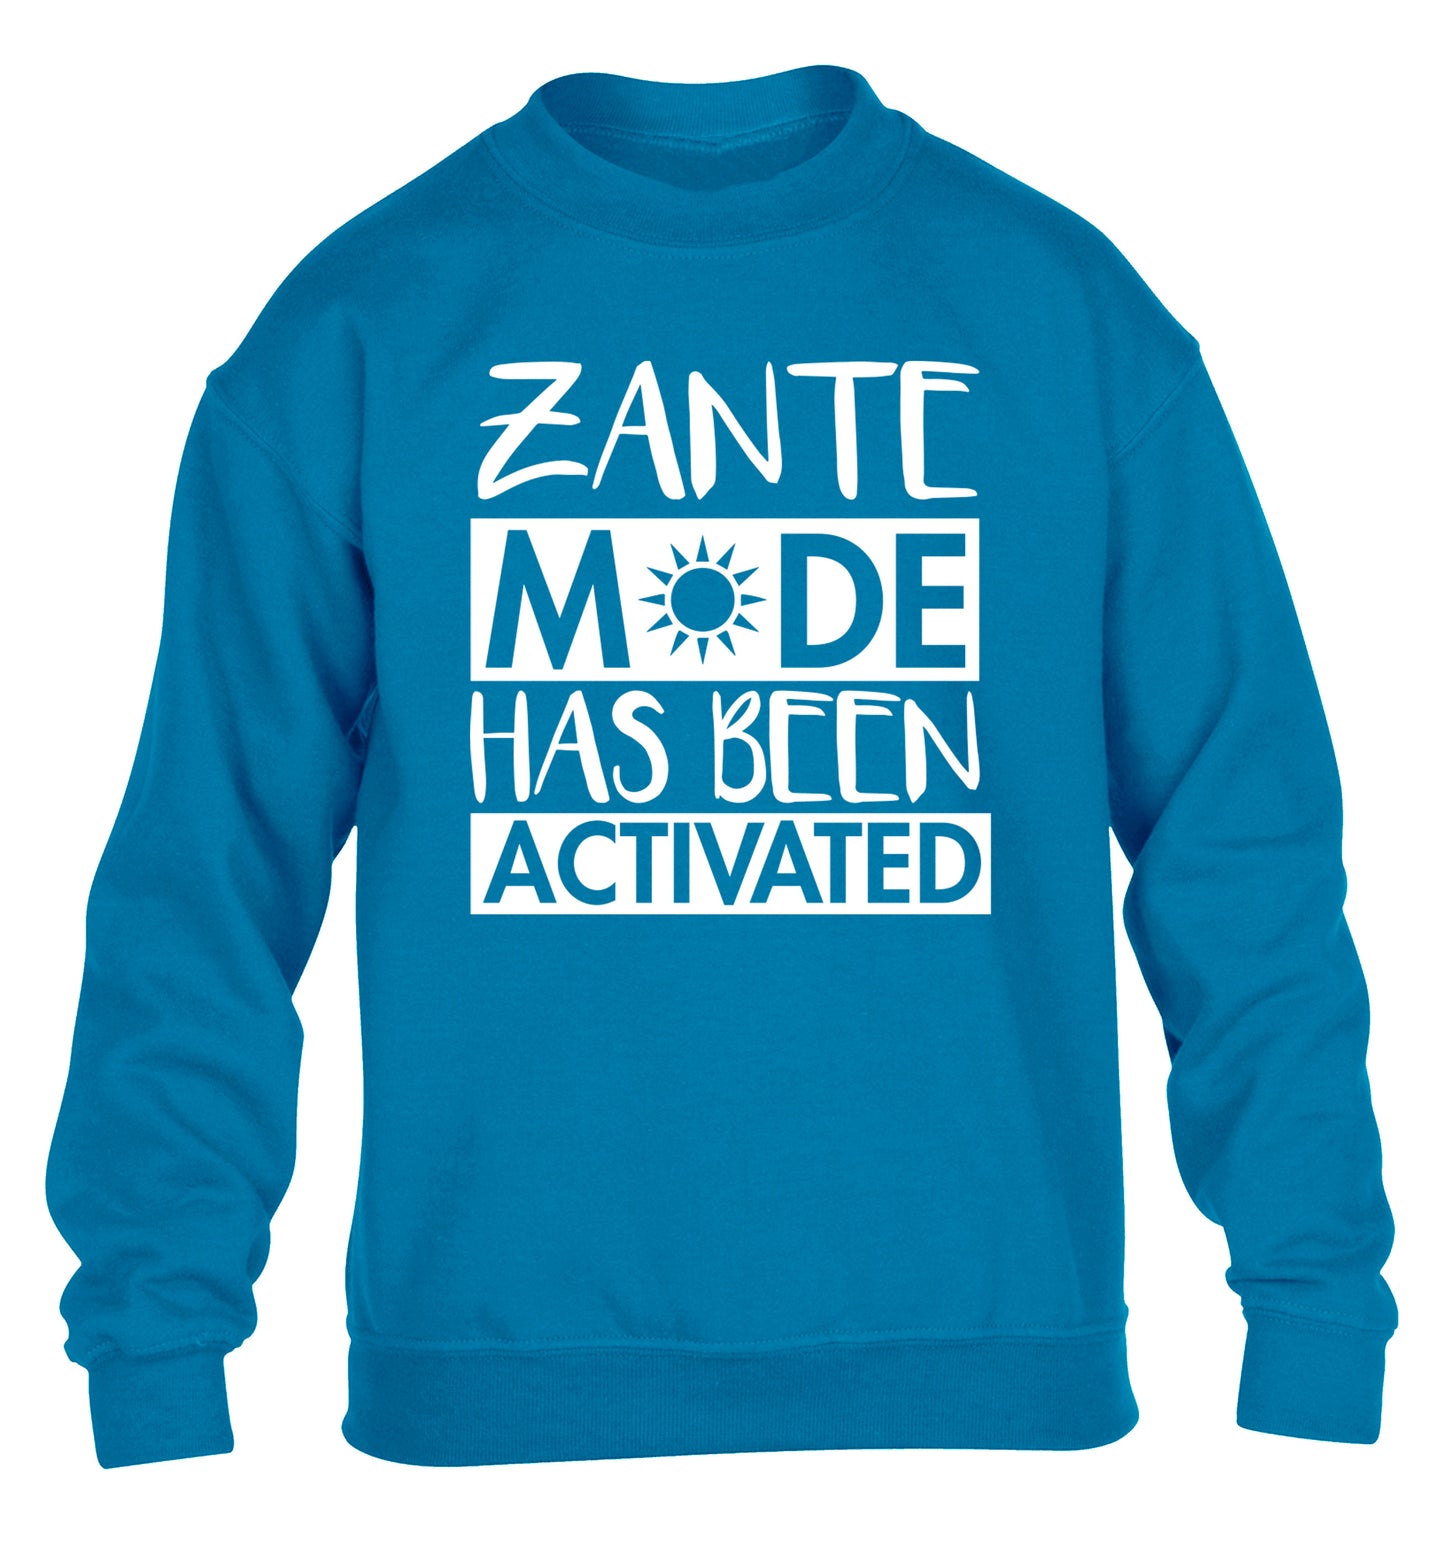 Zante mode has been activated children's blue sweater 12-13 Years